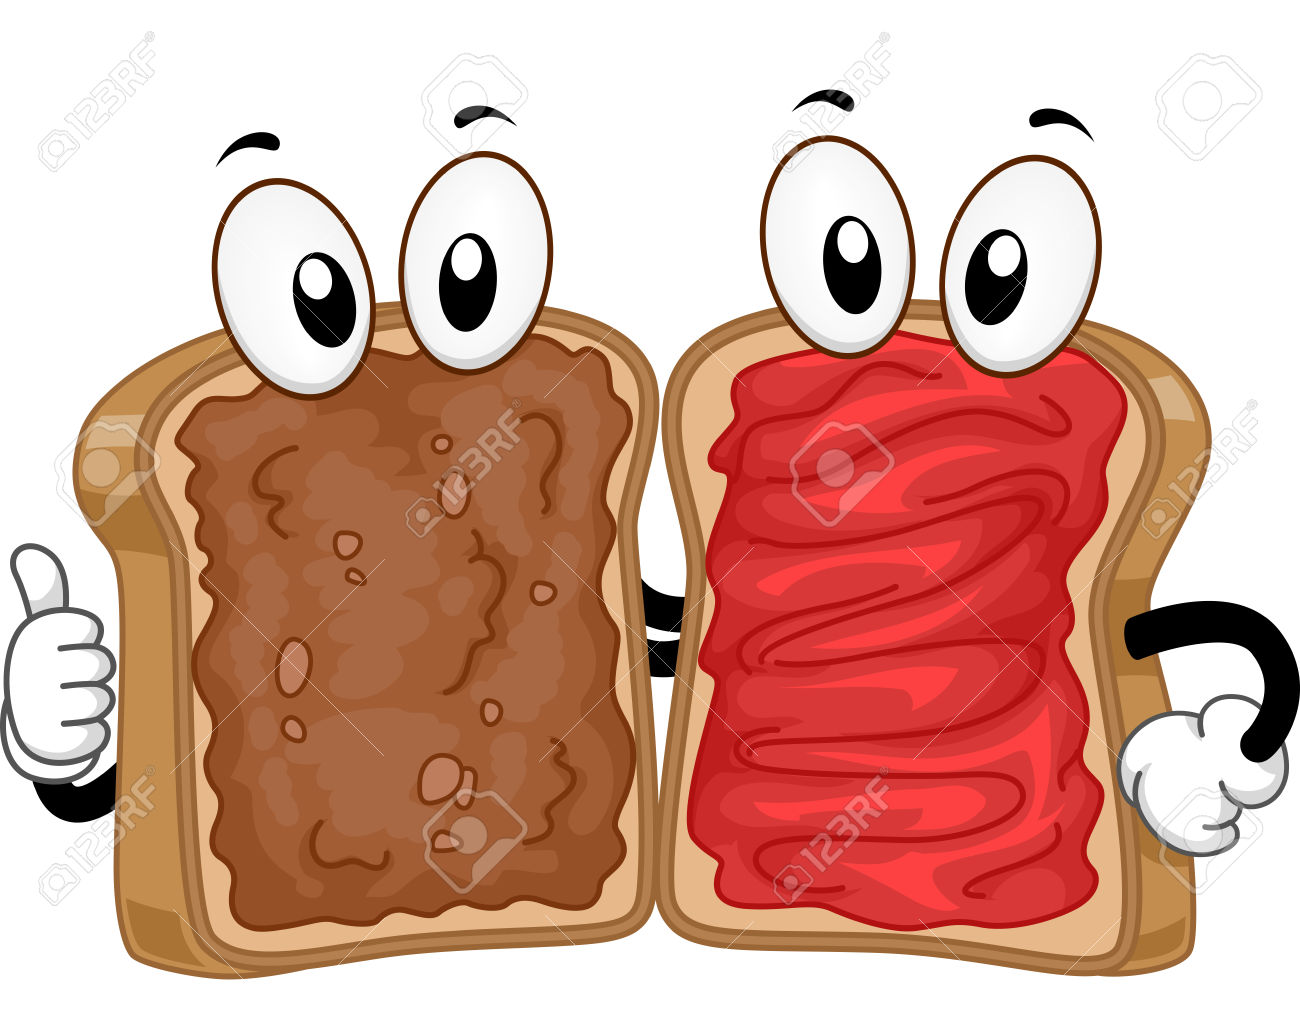 Peanut Butter And Jelly Clipart